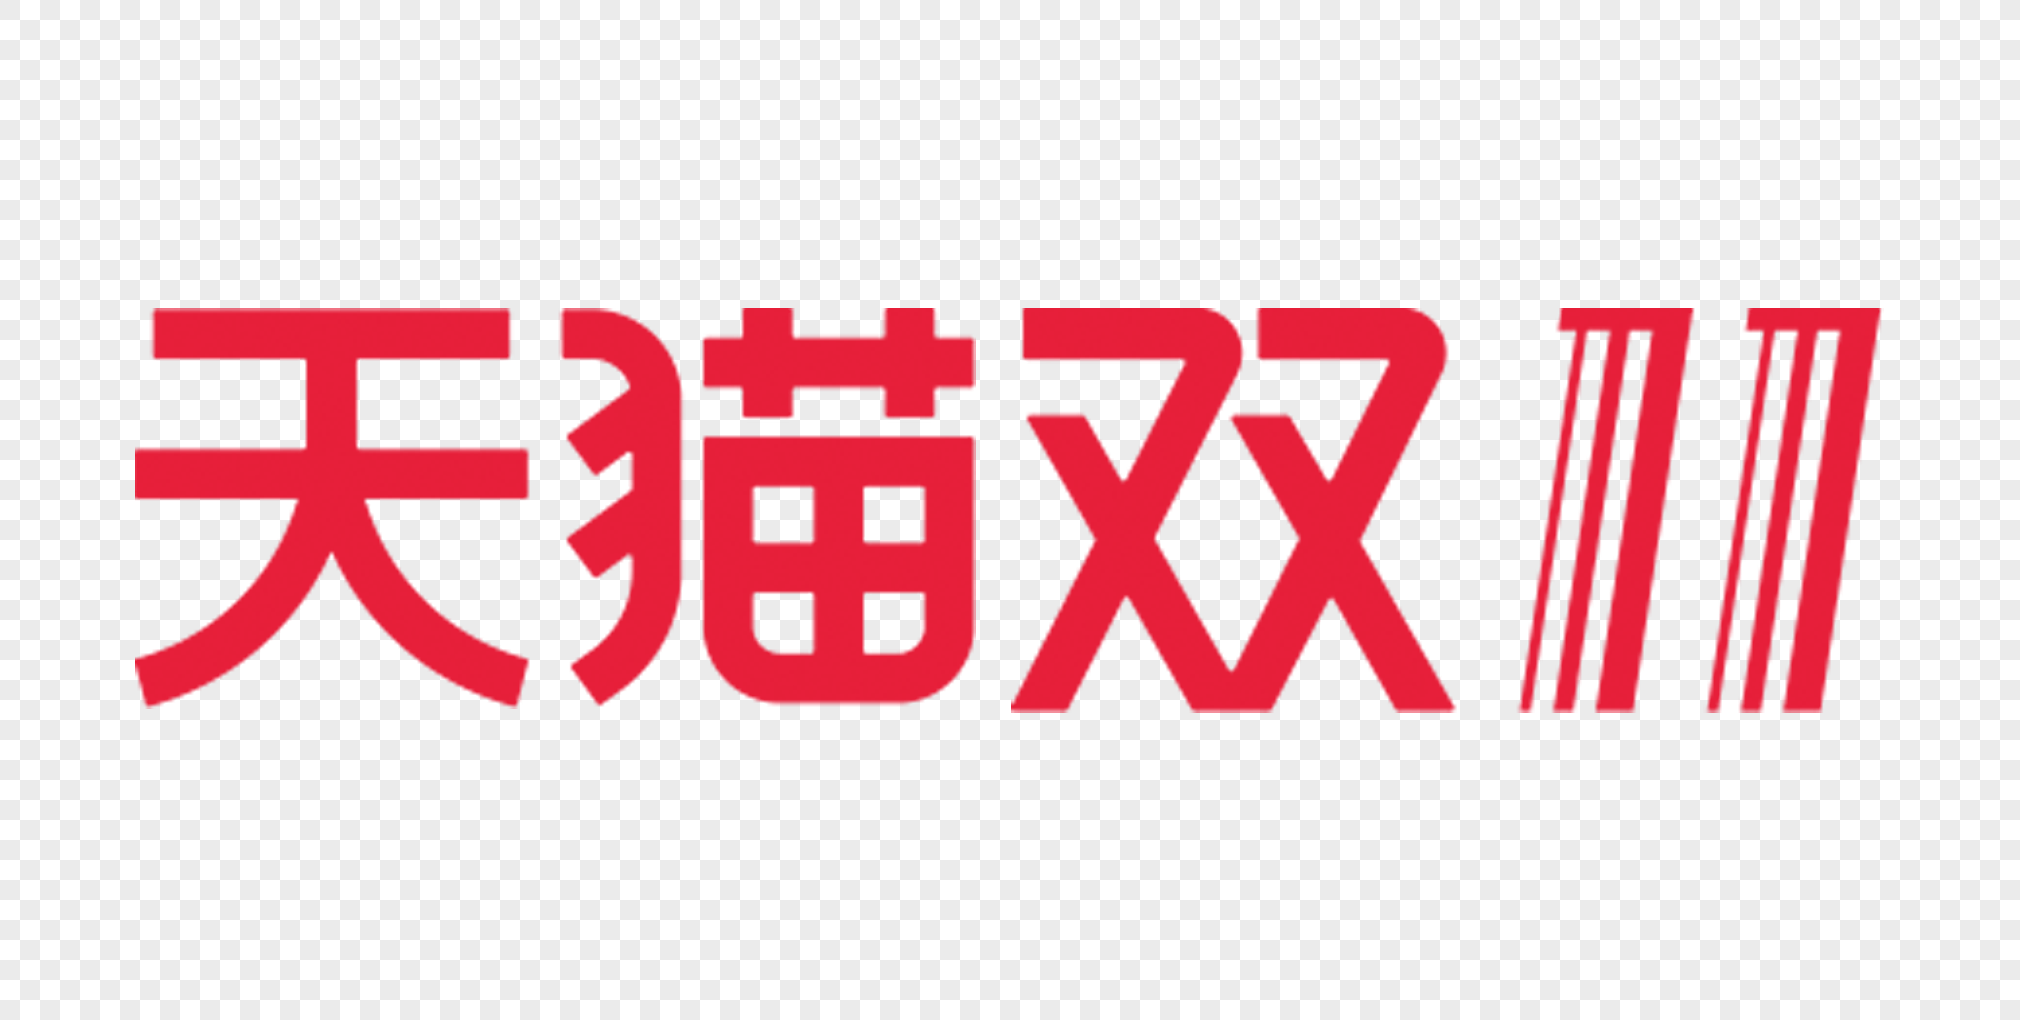 Tmall Logo - double 11 tmall logo png image_picture free download